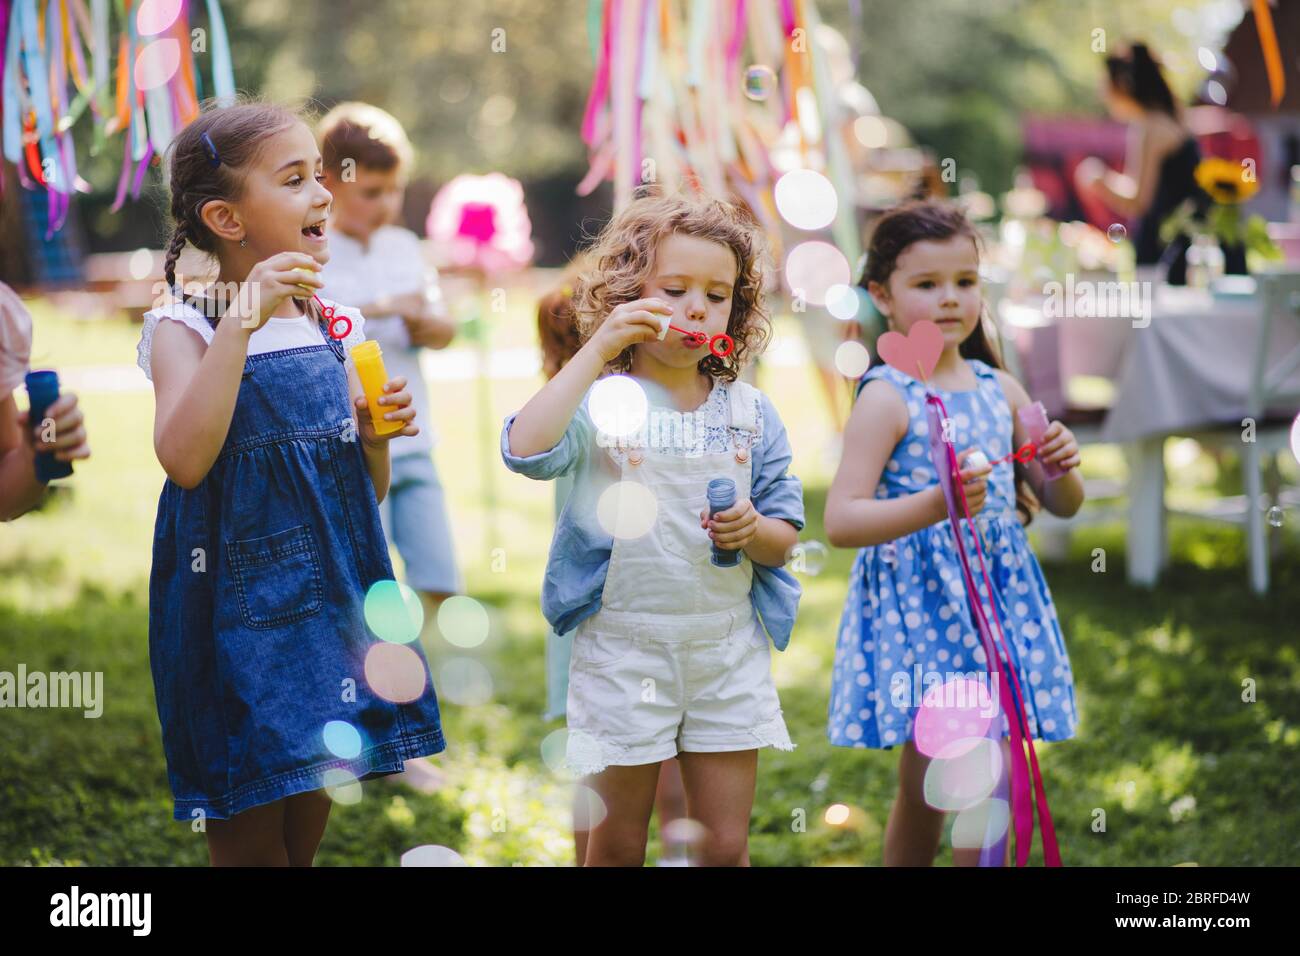 Small Children Outdoors In Garden In Summer Playing With Bubbles Stock